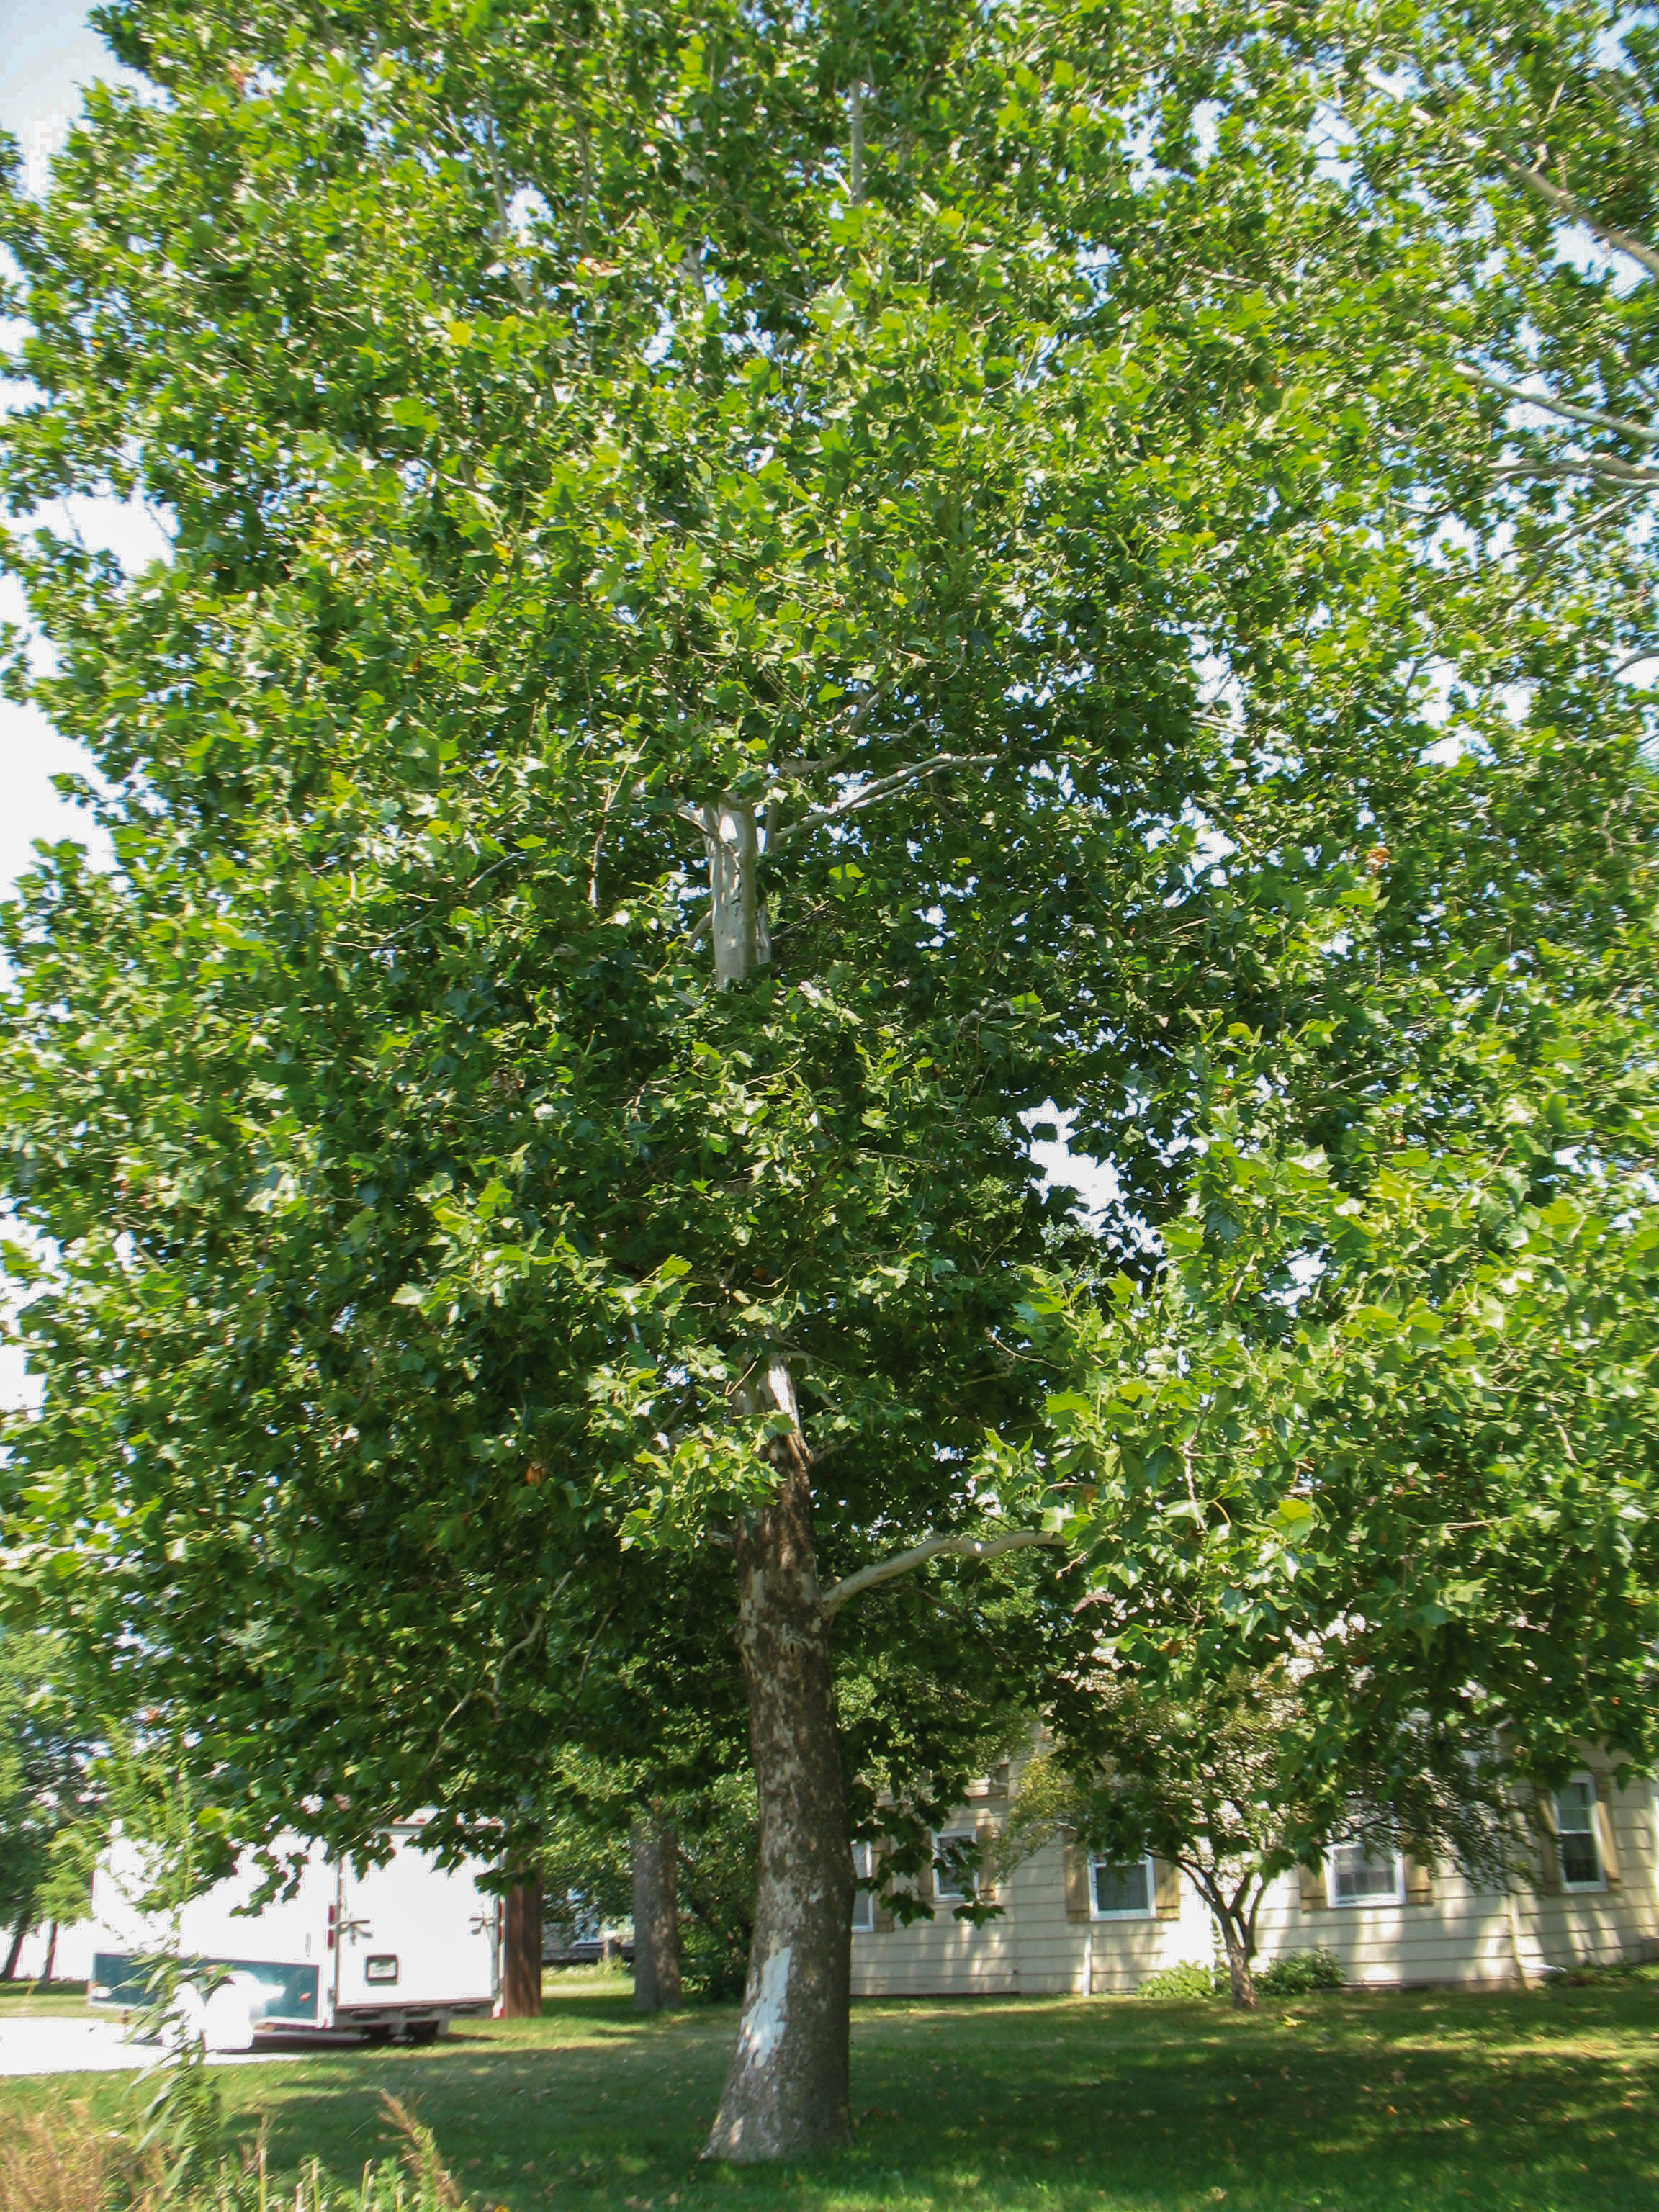 Sycamores are great choices if you need fast-growing trees | Iowa DNR